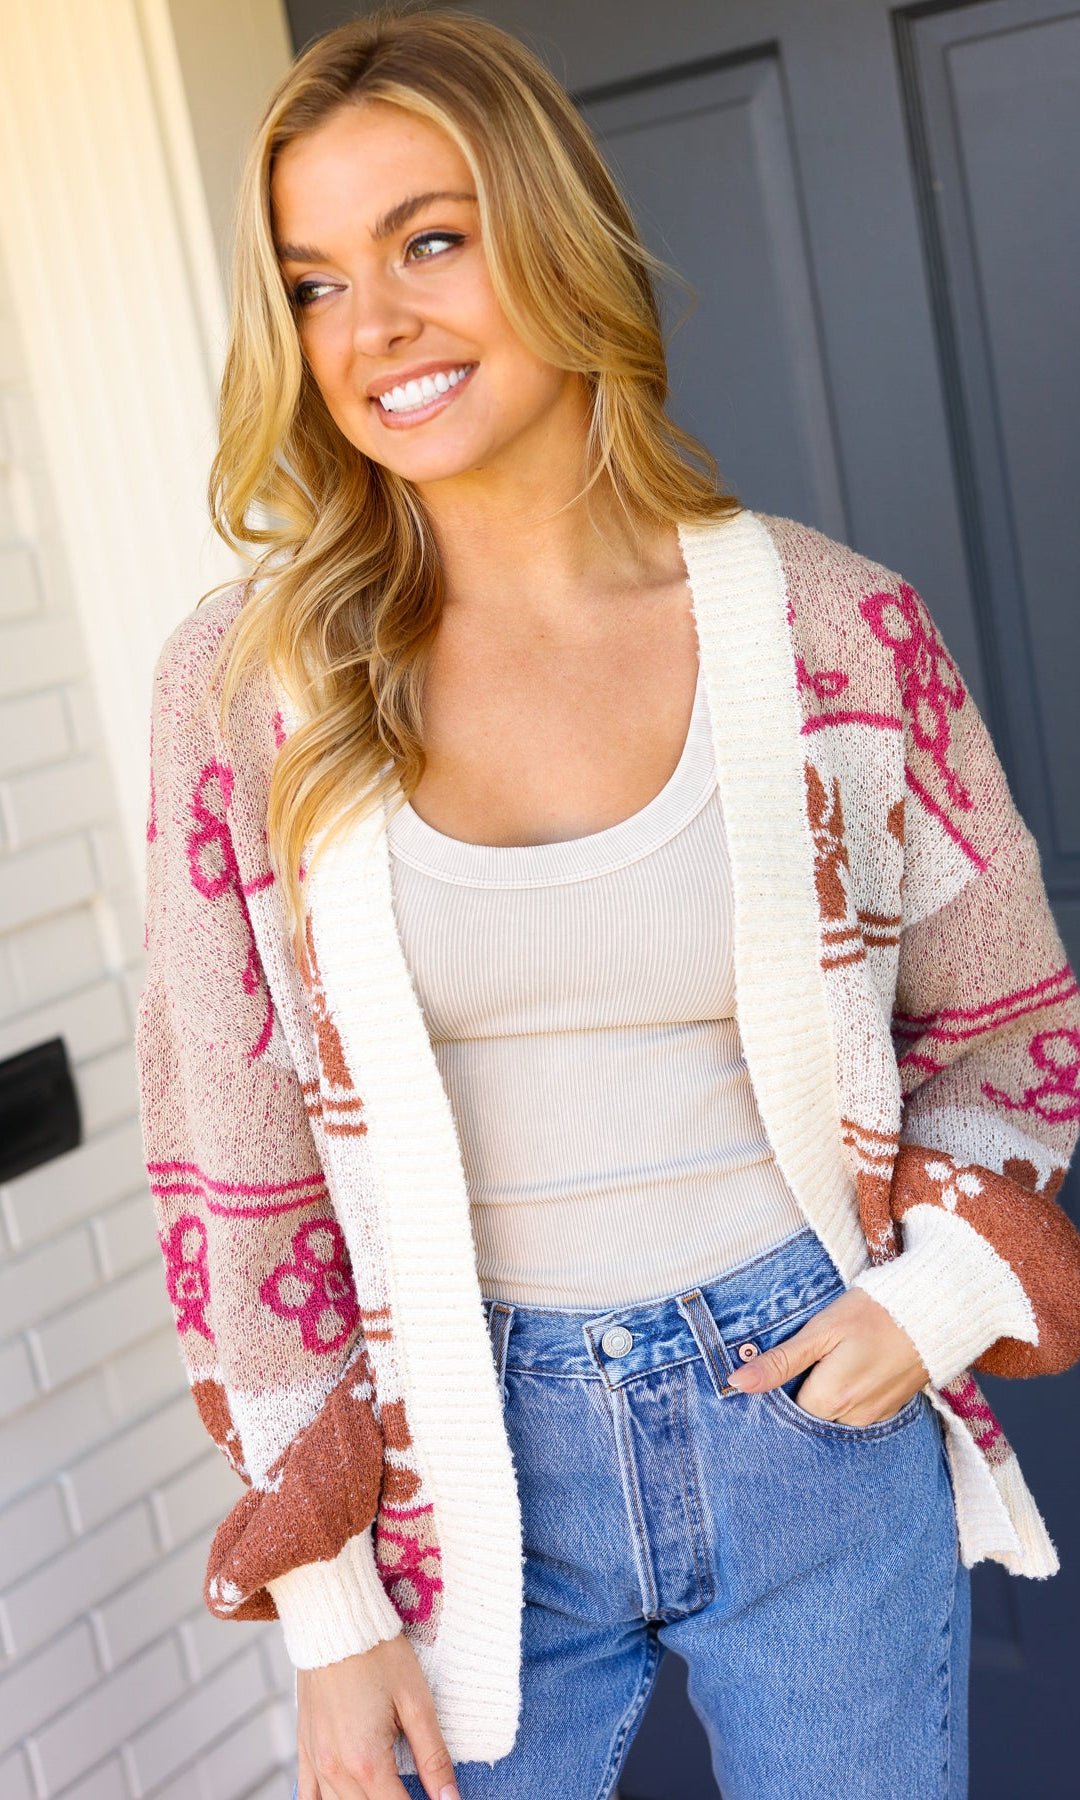 Take on The Day Ivory Floral Stripe Open Cardigan Very J